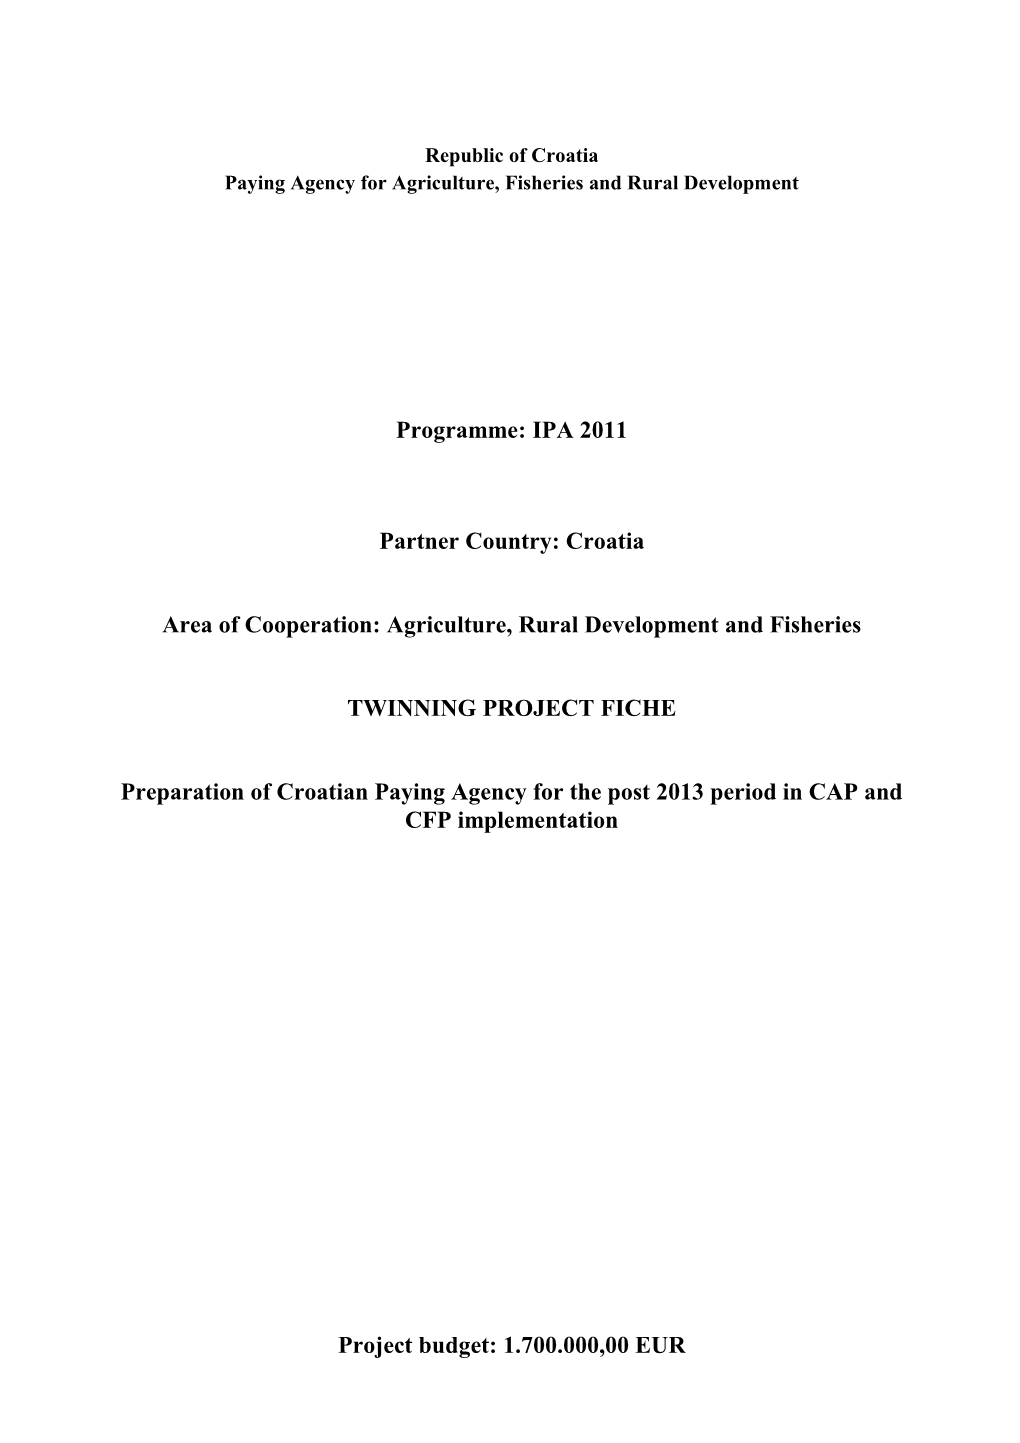 HR 11 IB AG 01 Preparation of Croatian Paying Agency for the Post 2013 Period in CAP And